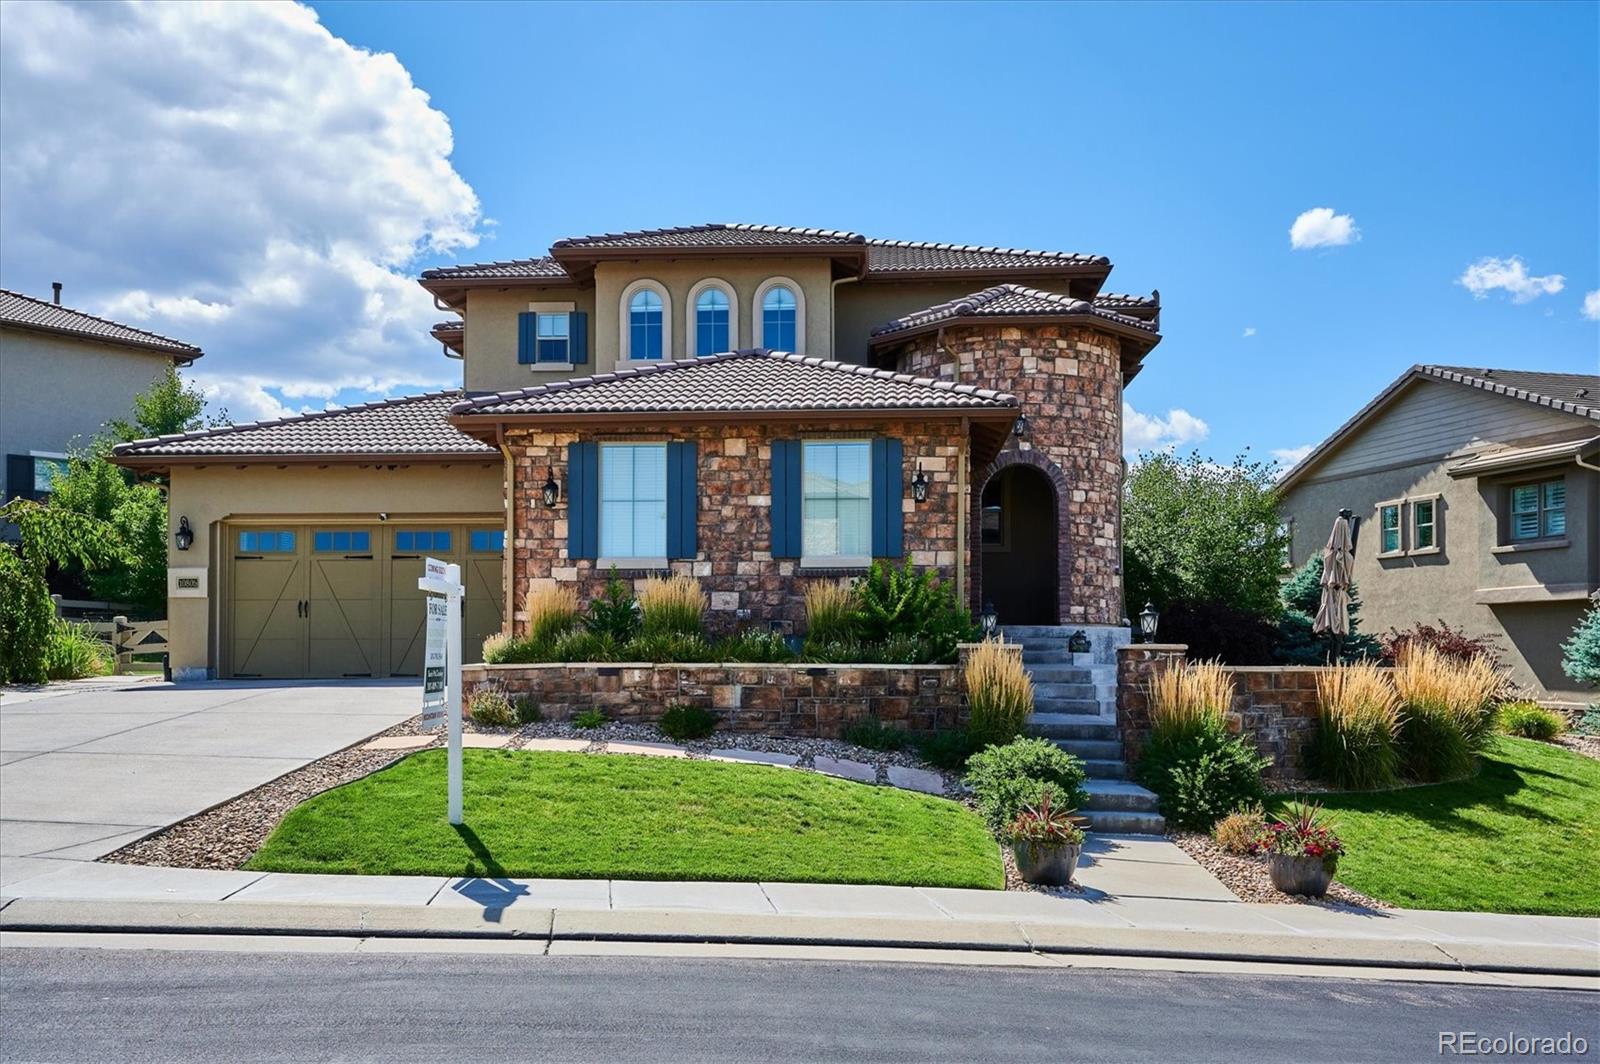 10805  manorstone drive, Highlands Ranch sold home. Closed on 2024-03-28 for $1,830,000.